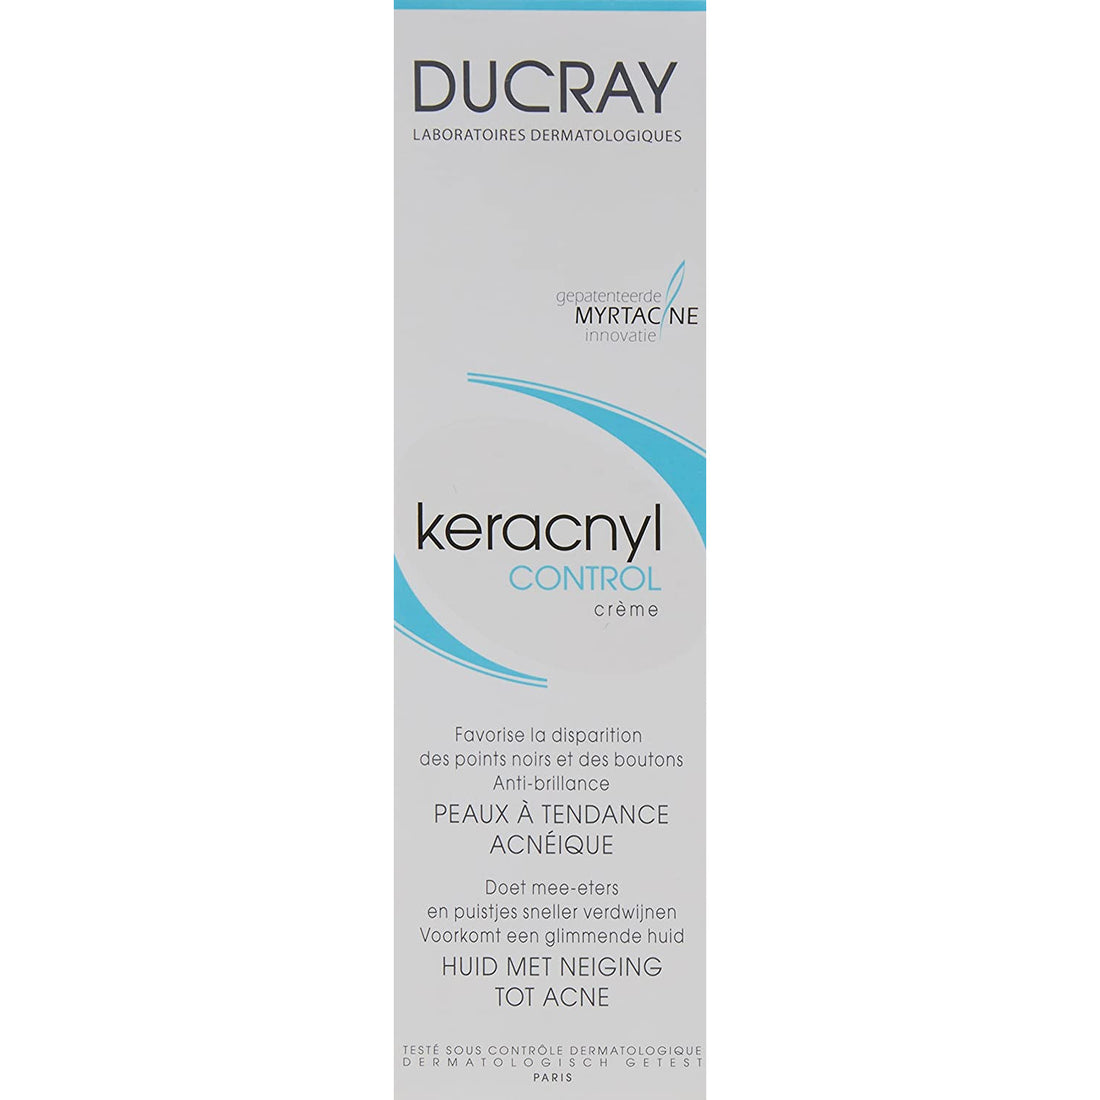 Ducray Keracnyl PP Anti-Imperfection Soothing Cream 30mL